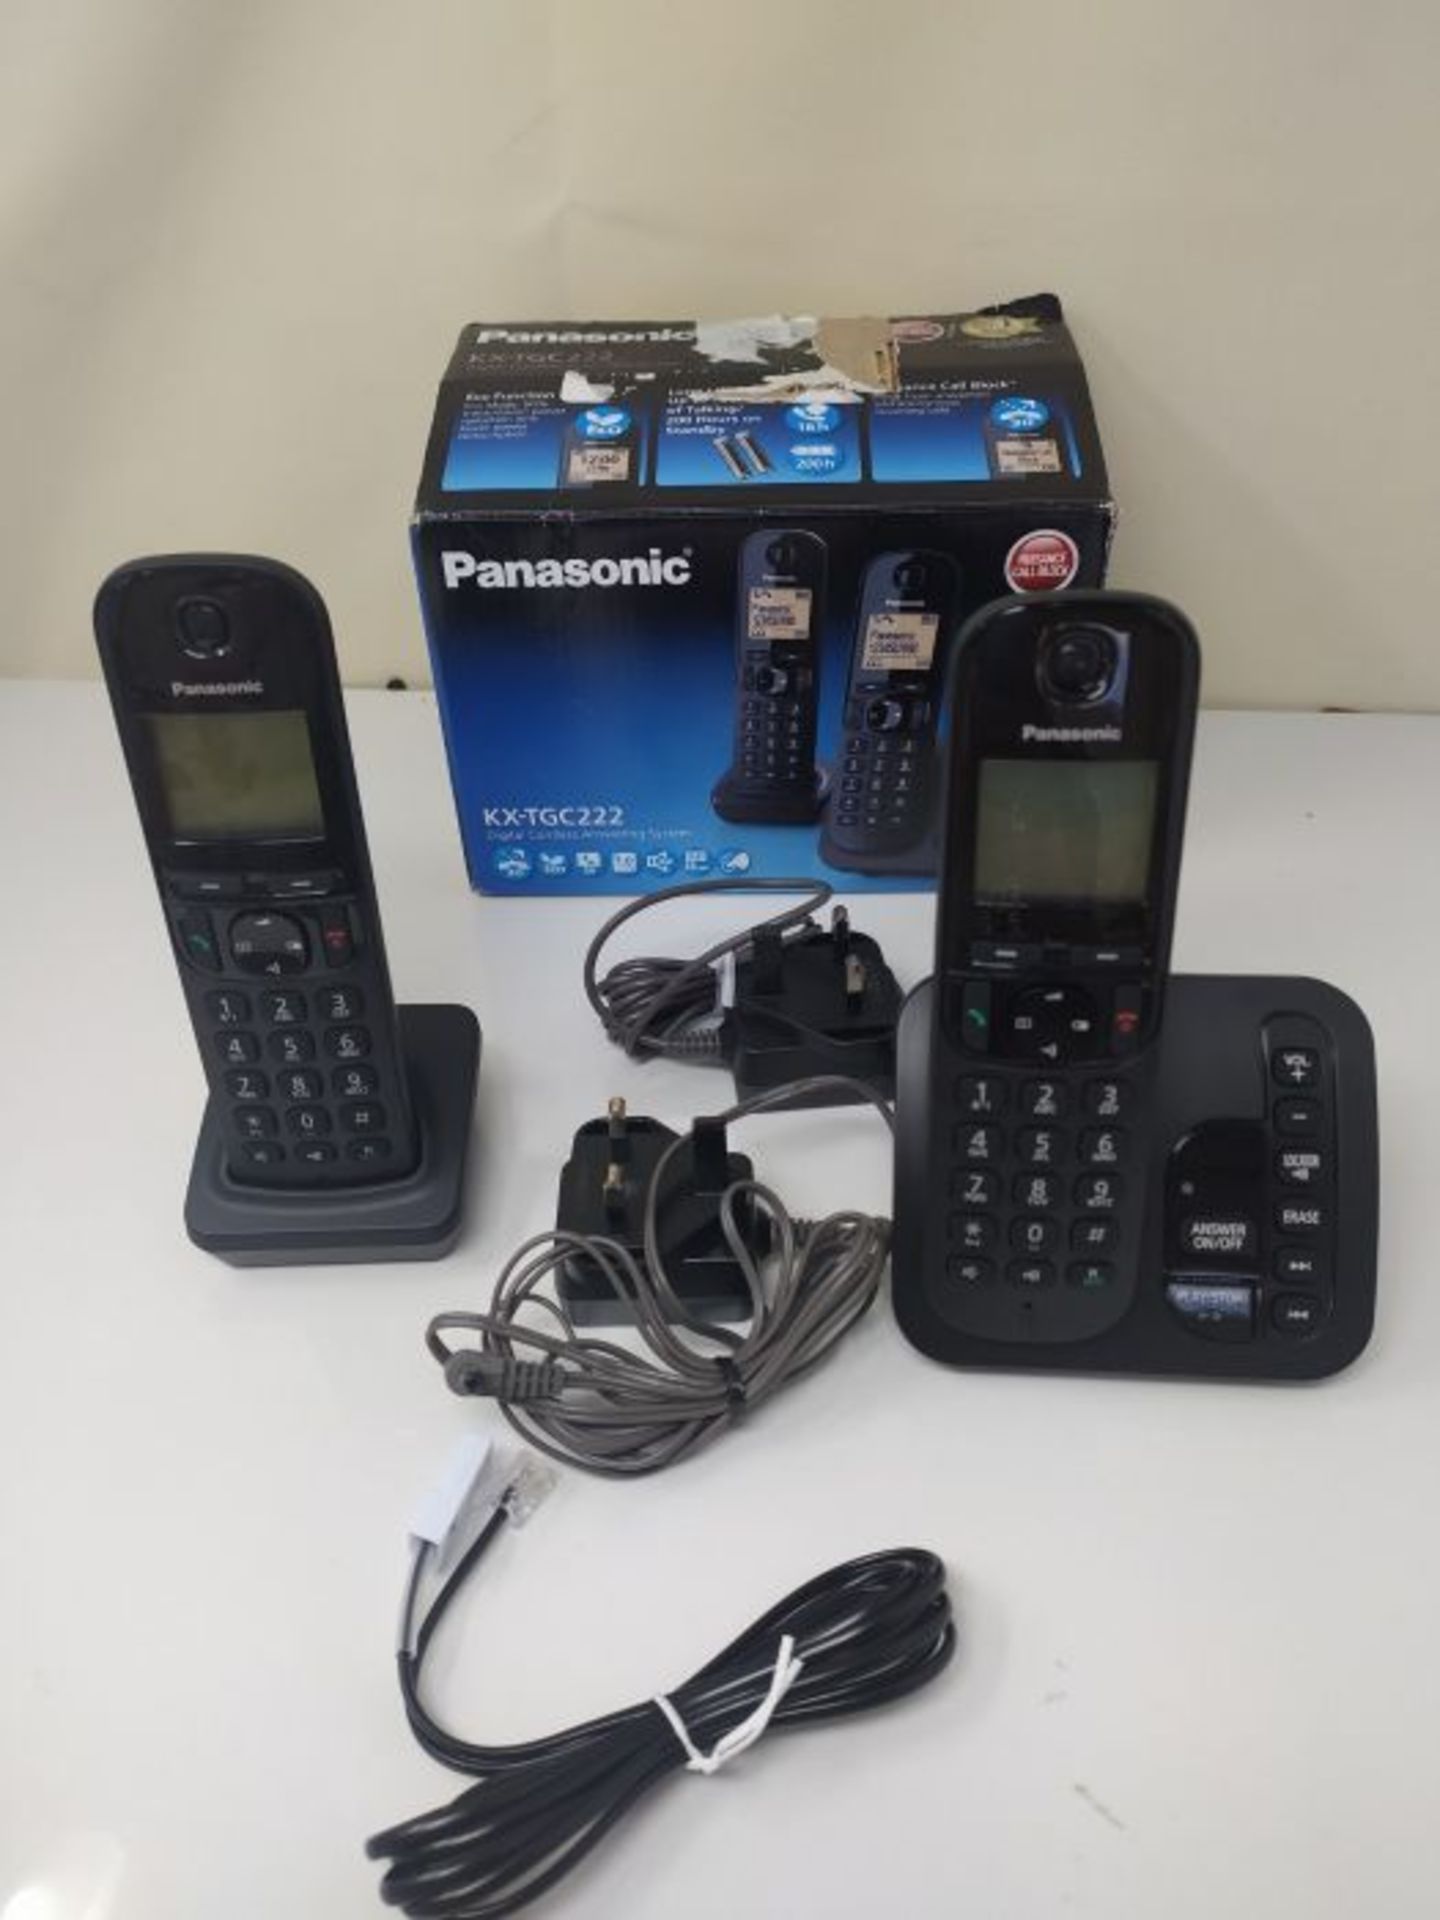 Panasonic KX-TGC222EB DECT Cordless Phone with Answering Machine, 1.6 inch Easy-to-Rea - Image 2 of 4